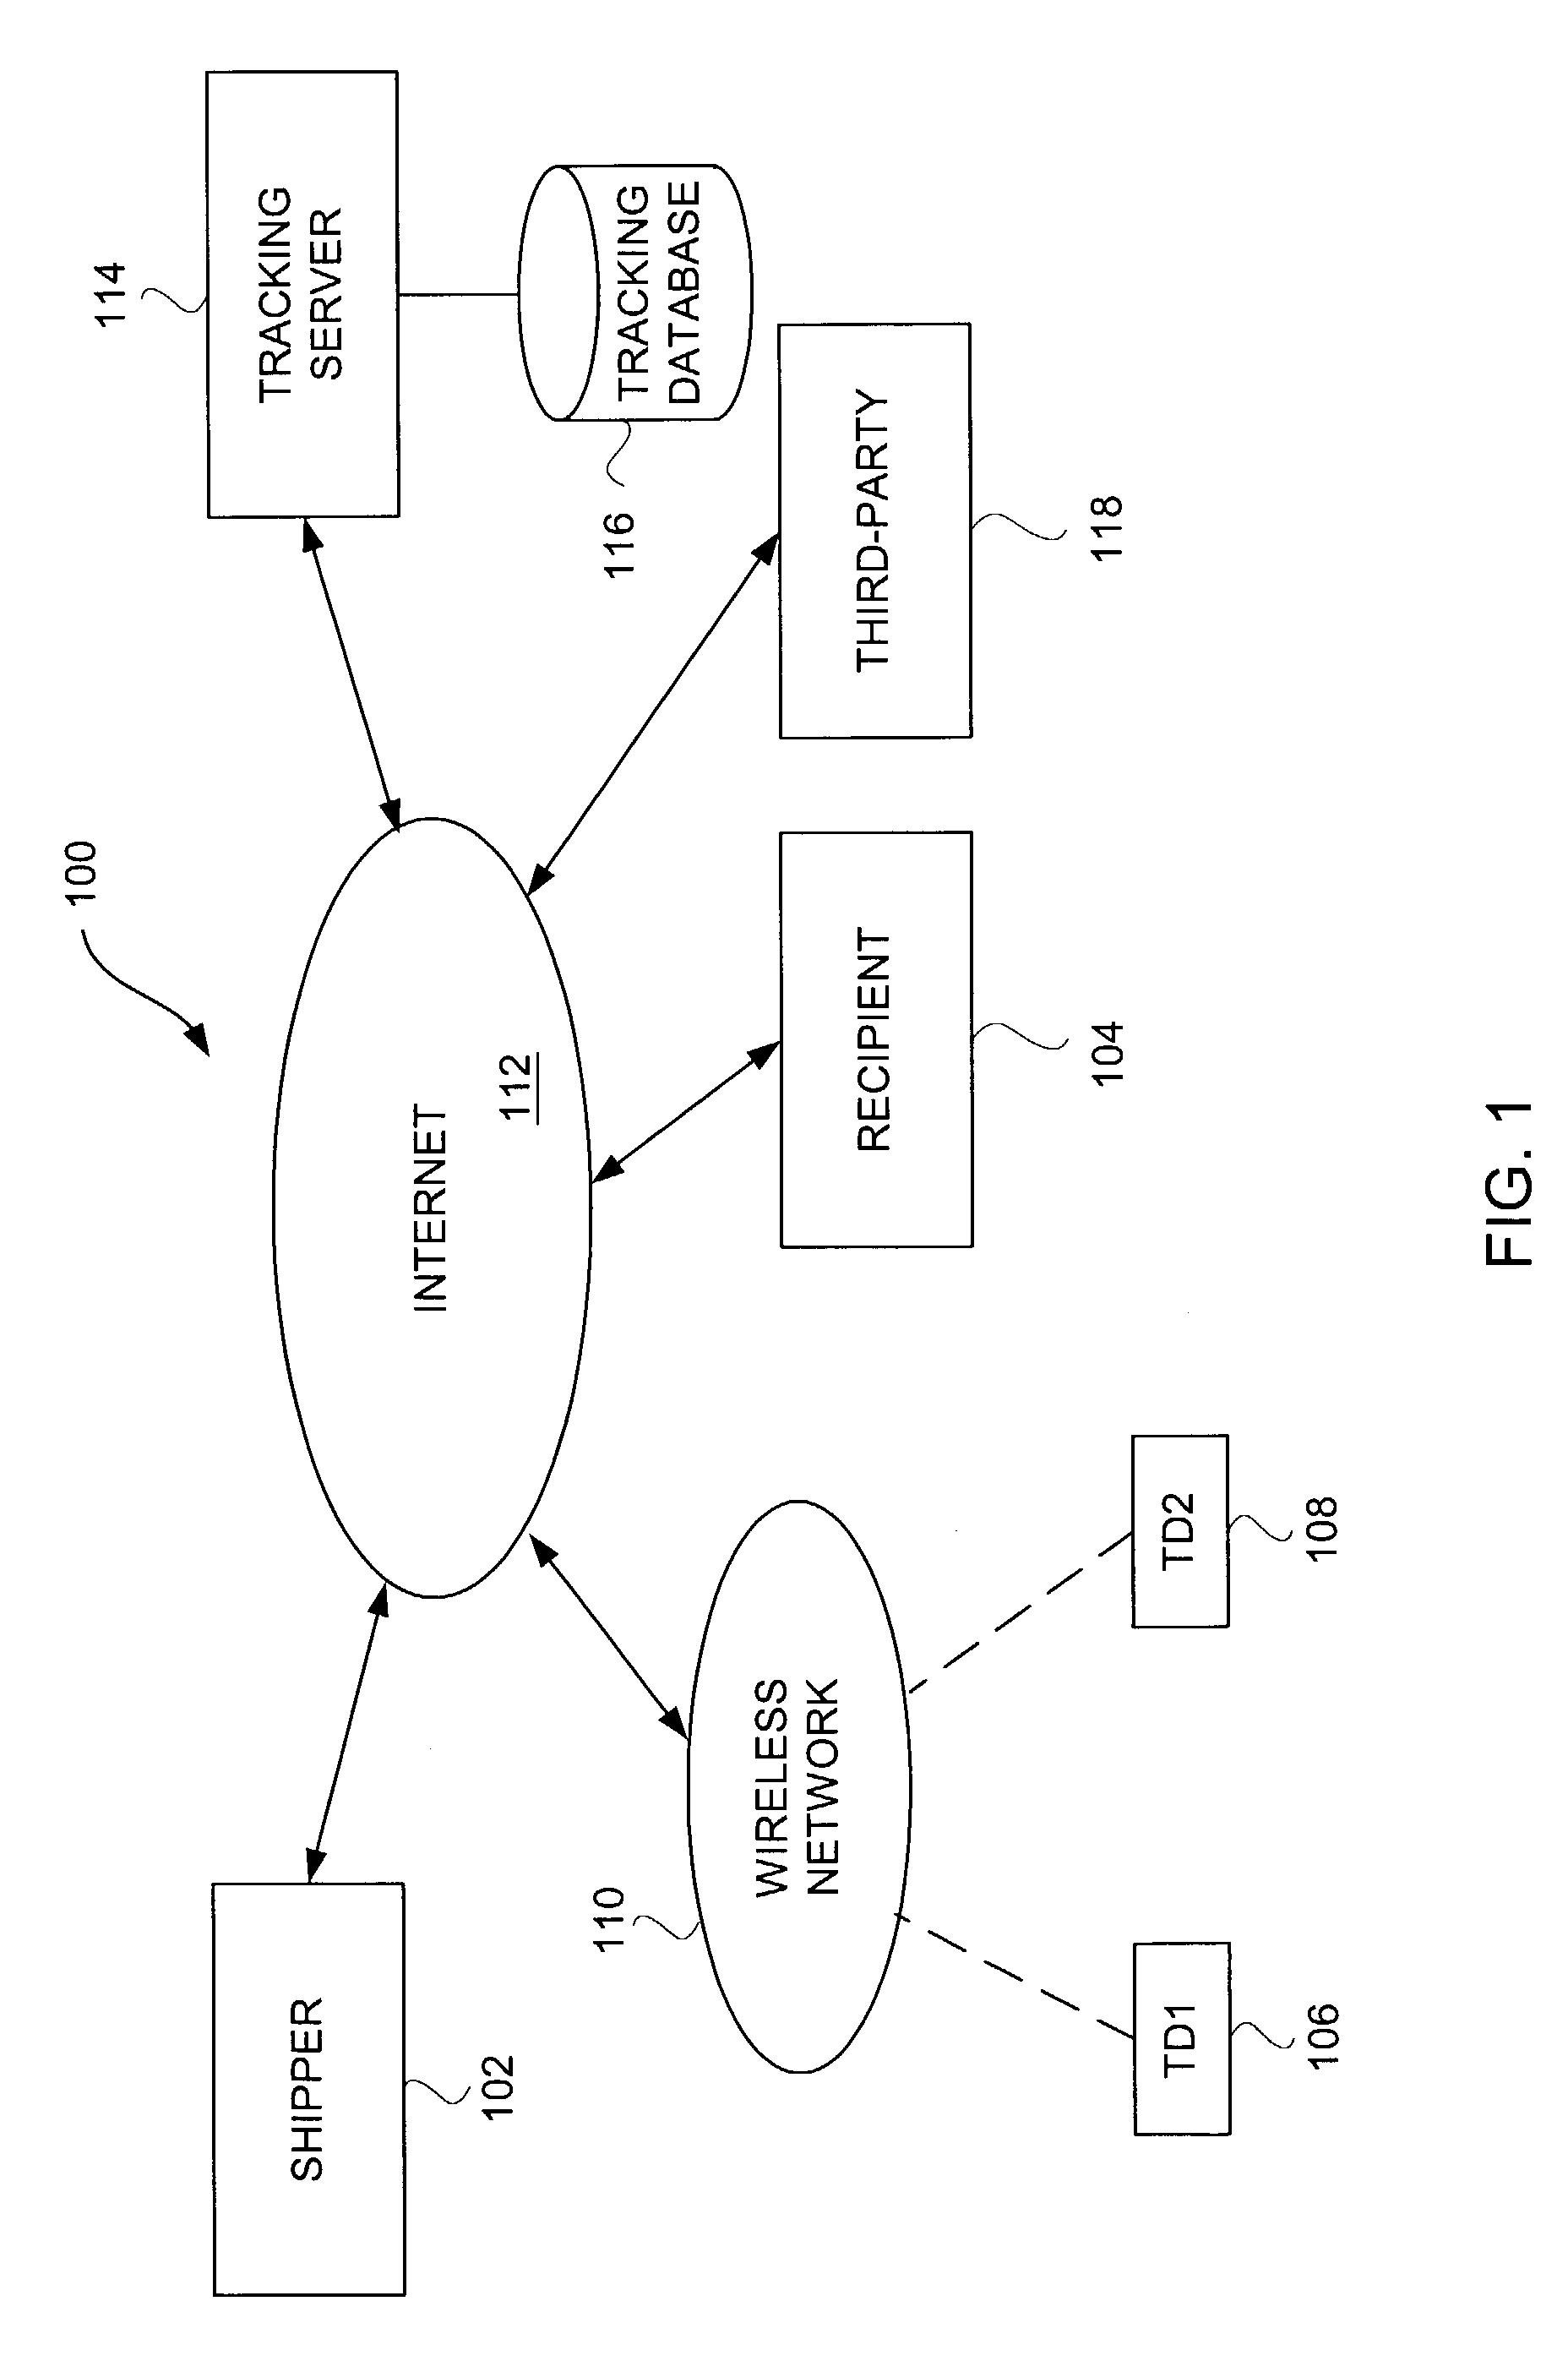 Method and system for providing shipment tracking and notifications